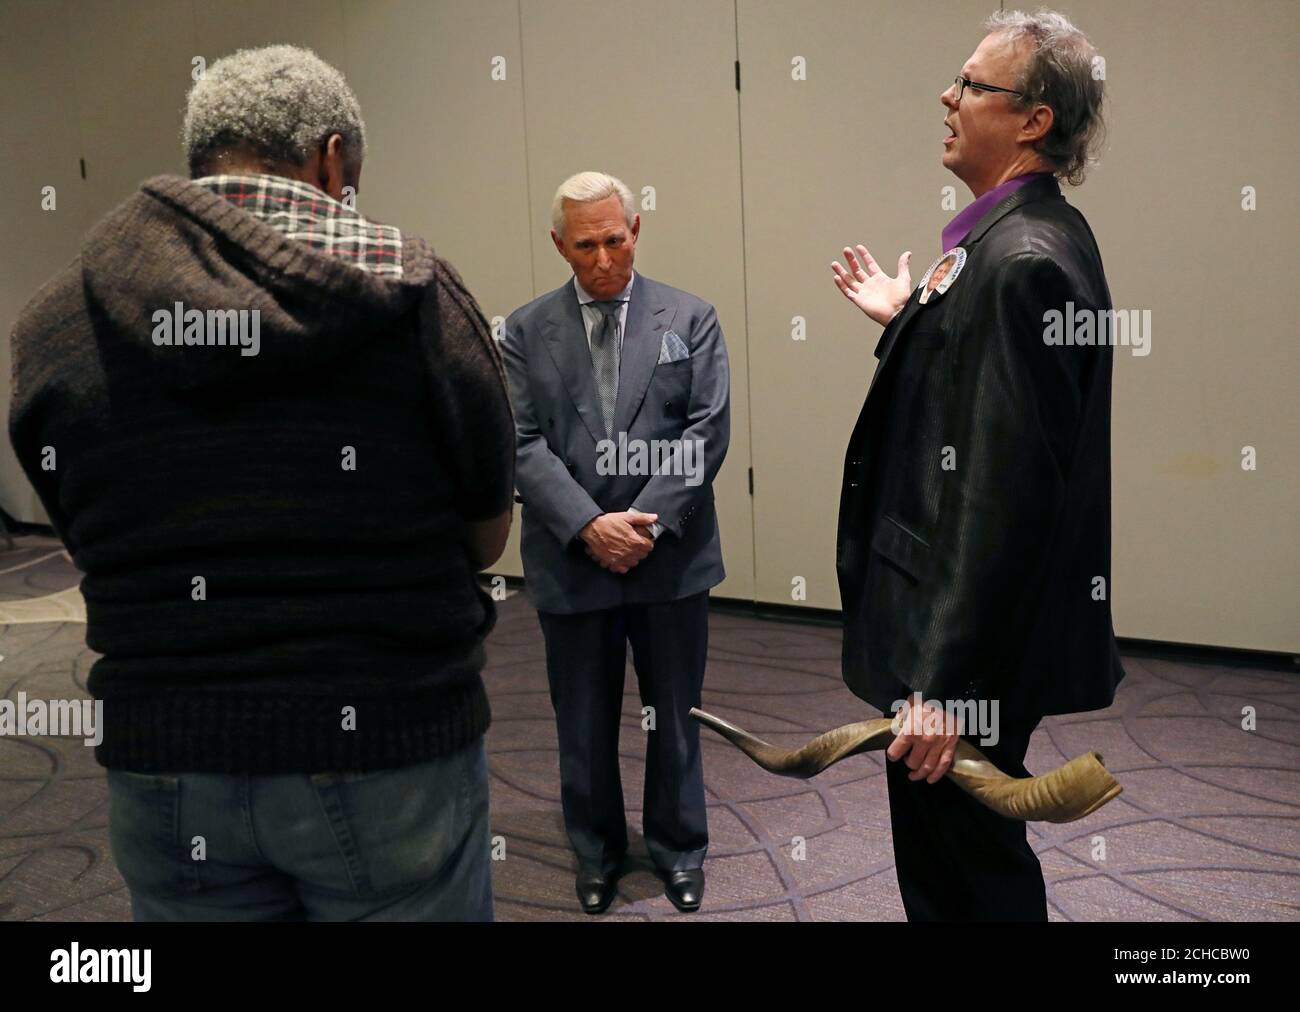 Johnny Rice (R) and Dr. Randy Lancaster Short pray over Roger Stone,  longtime ally of U.S. President Donald Trump, after he appeared for a press  conference and interviews with media in Washington,